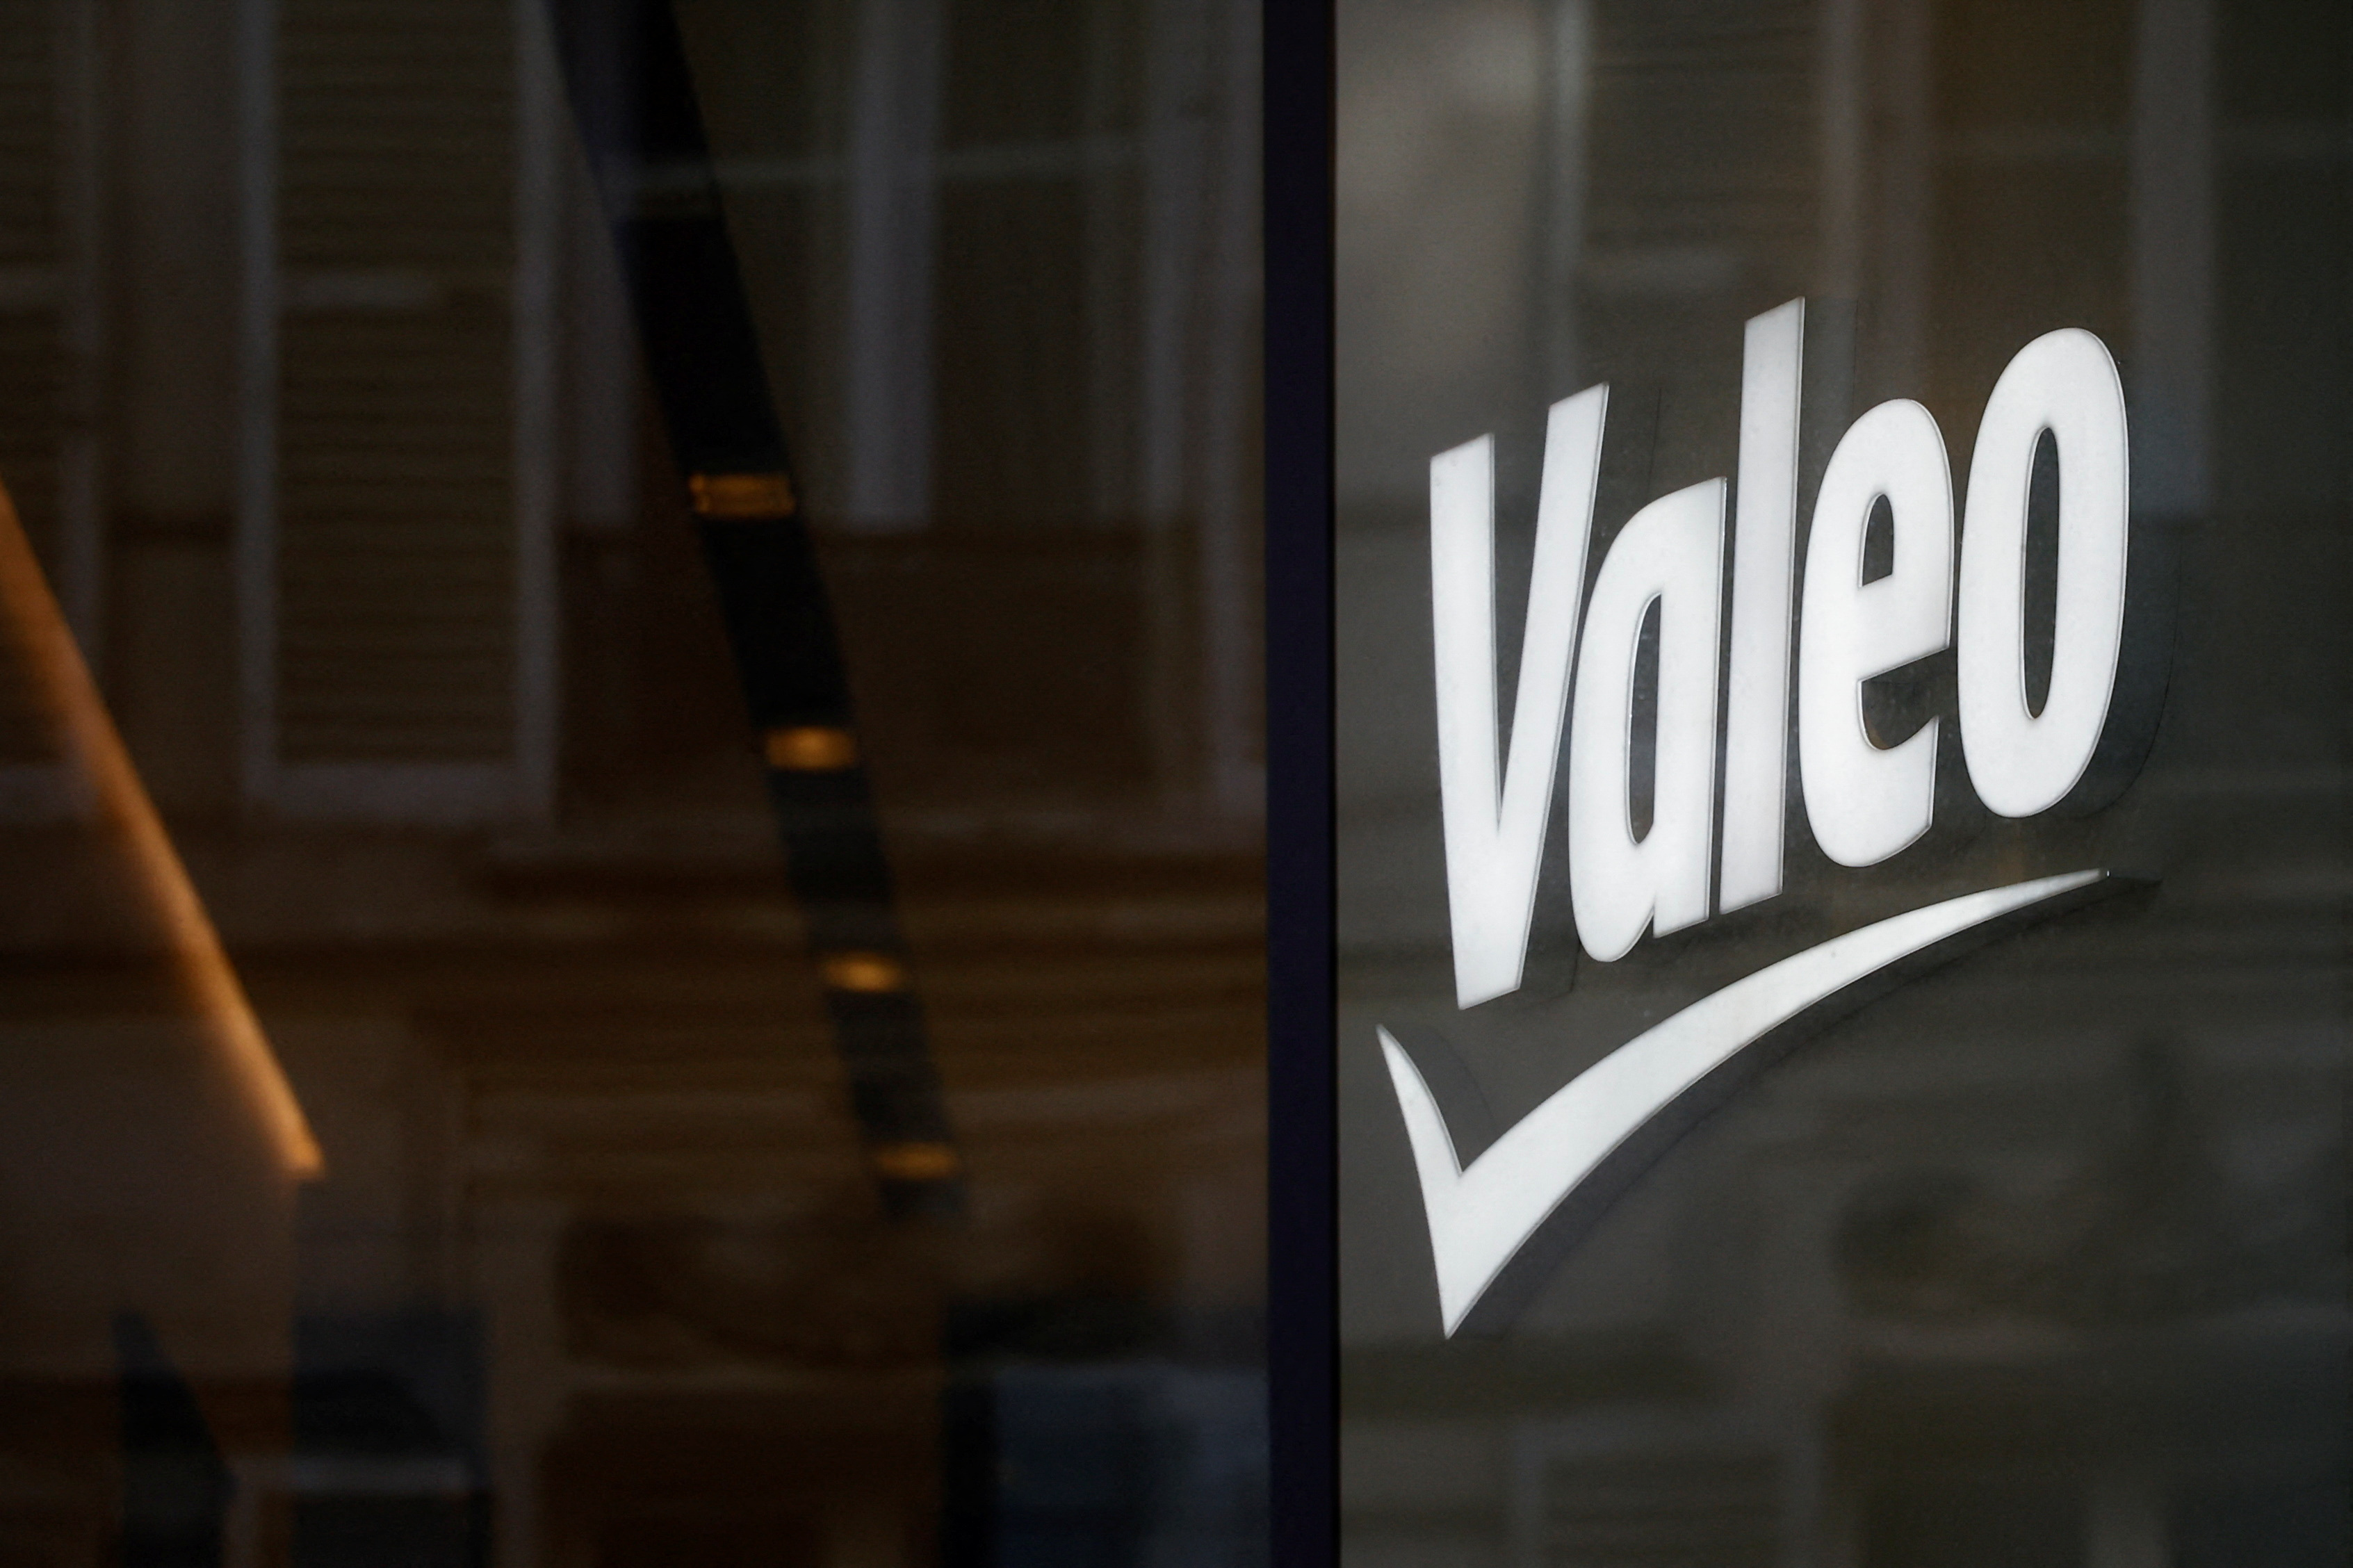 France's Valeo third-quarter sales rise driven by key regions, businesses